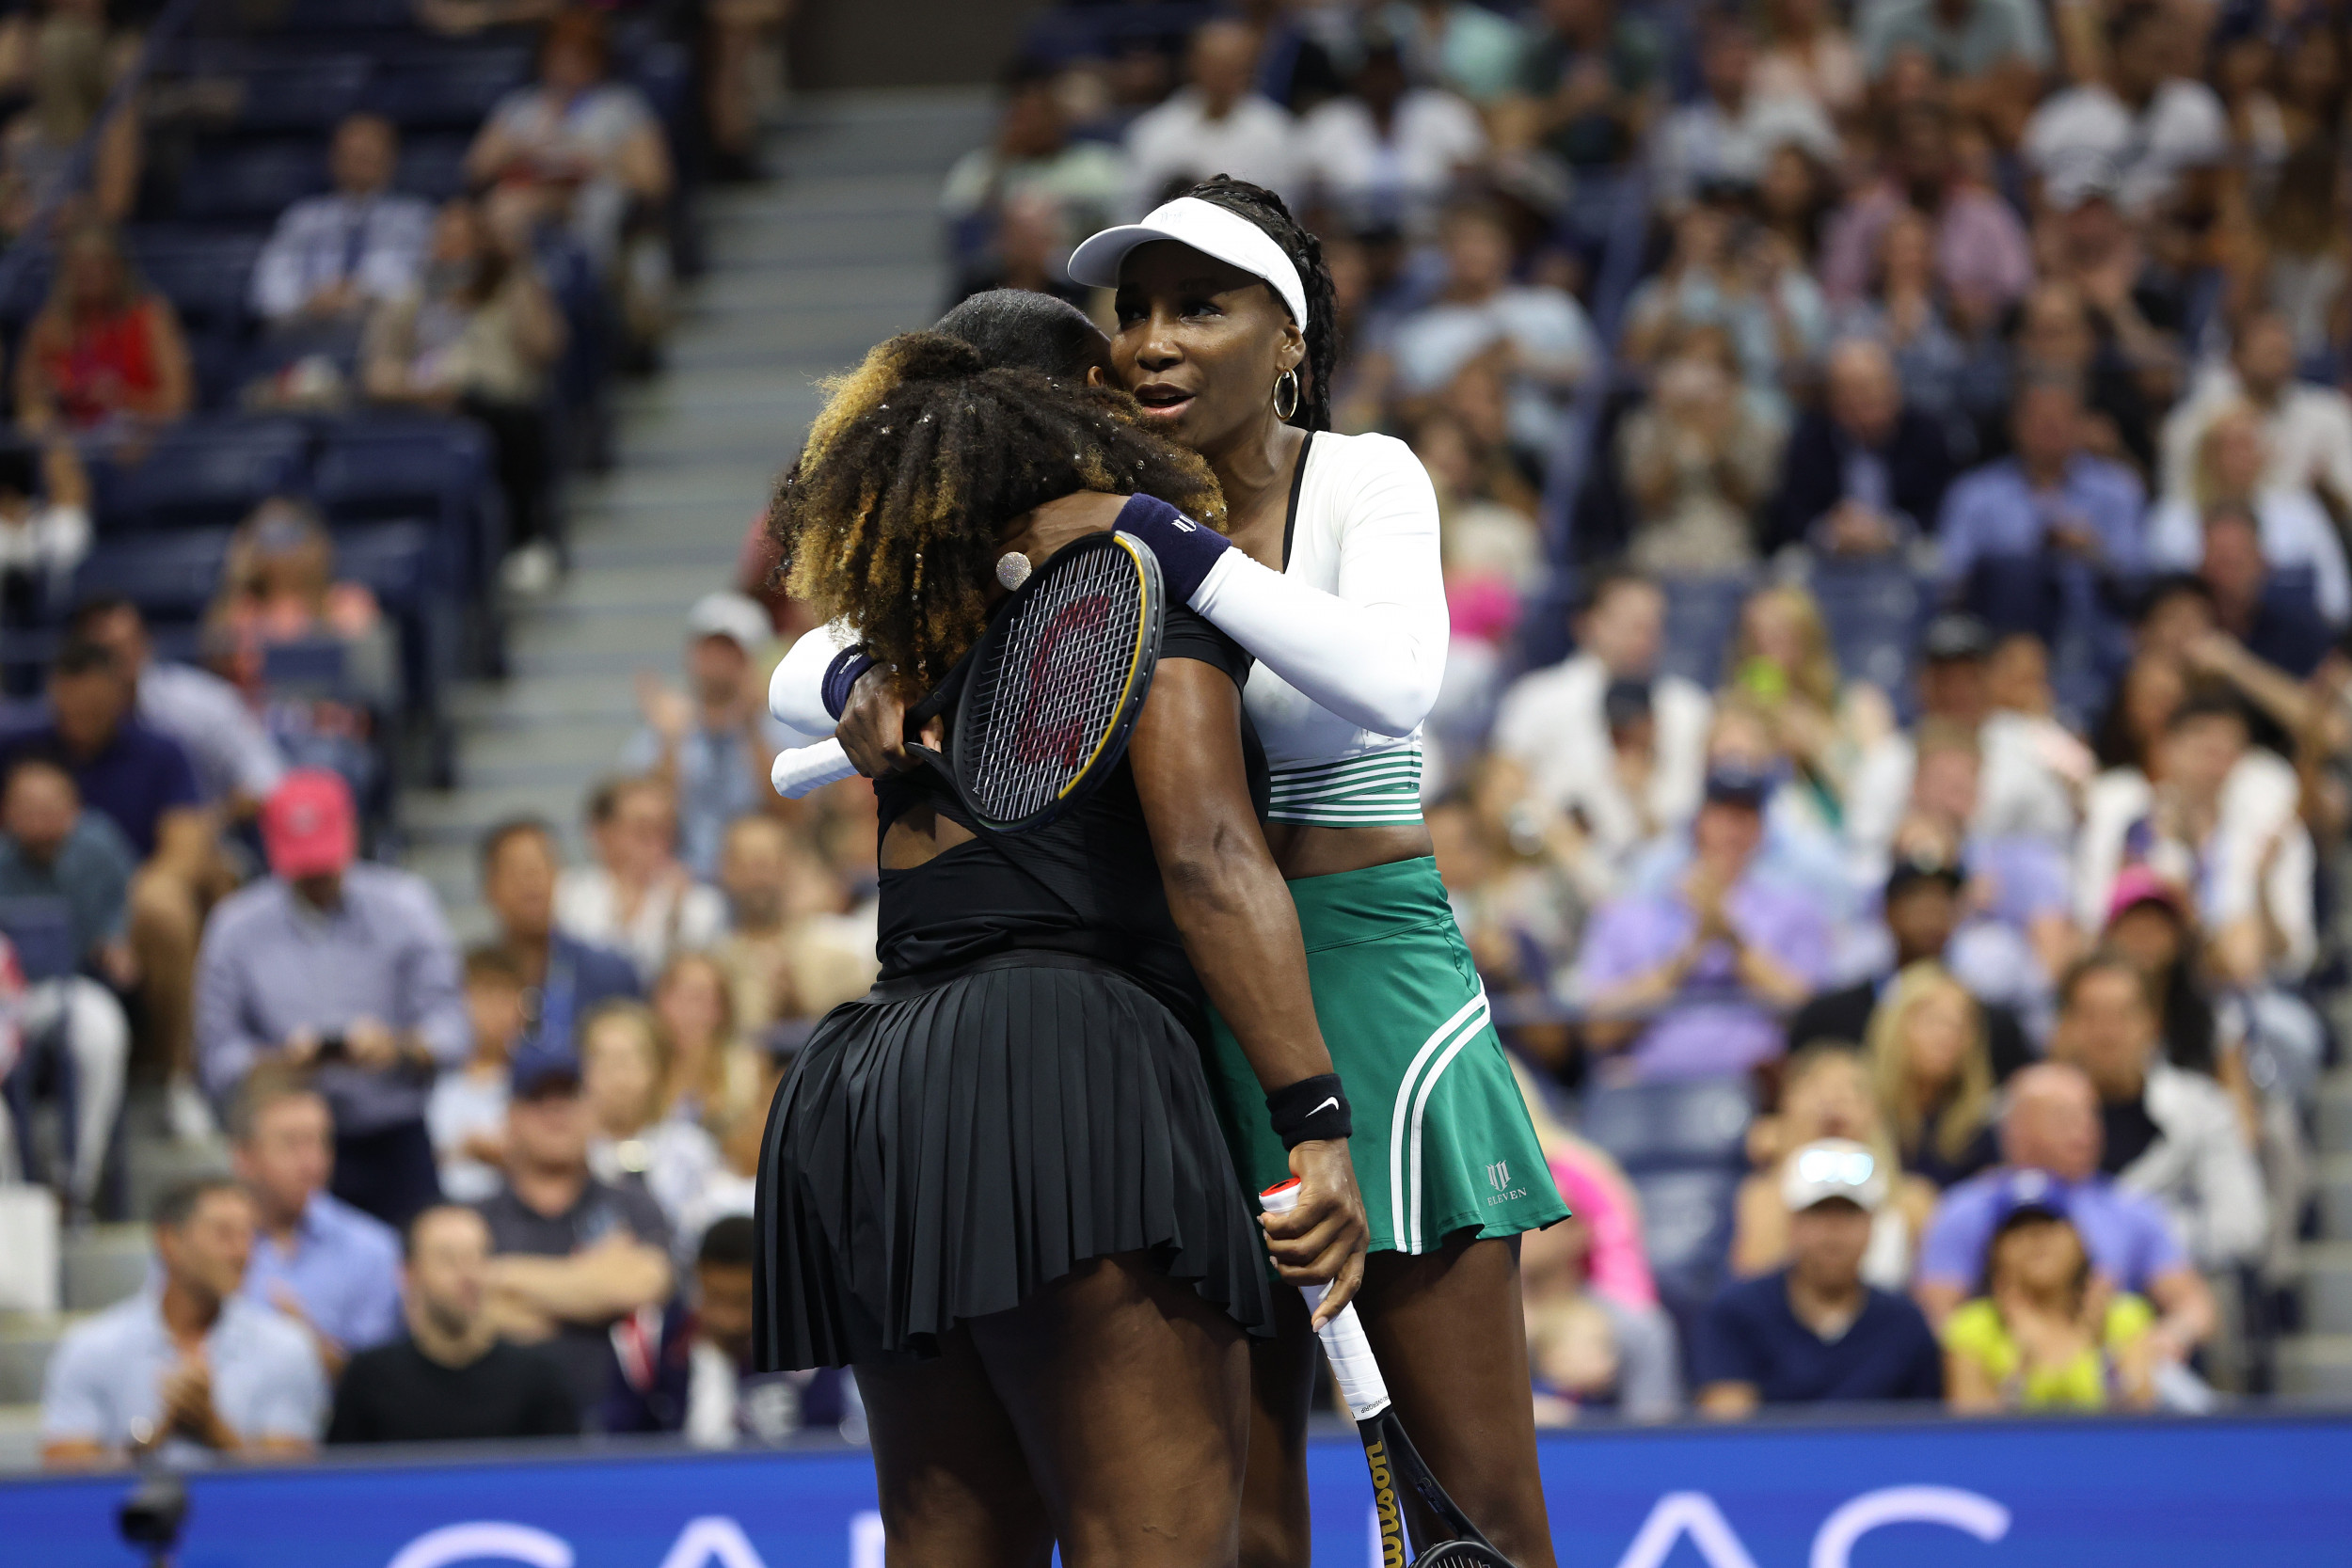 Serena and Venus Williams' "hug says it all' after U.S. Open...